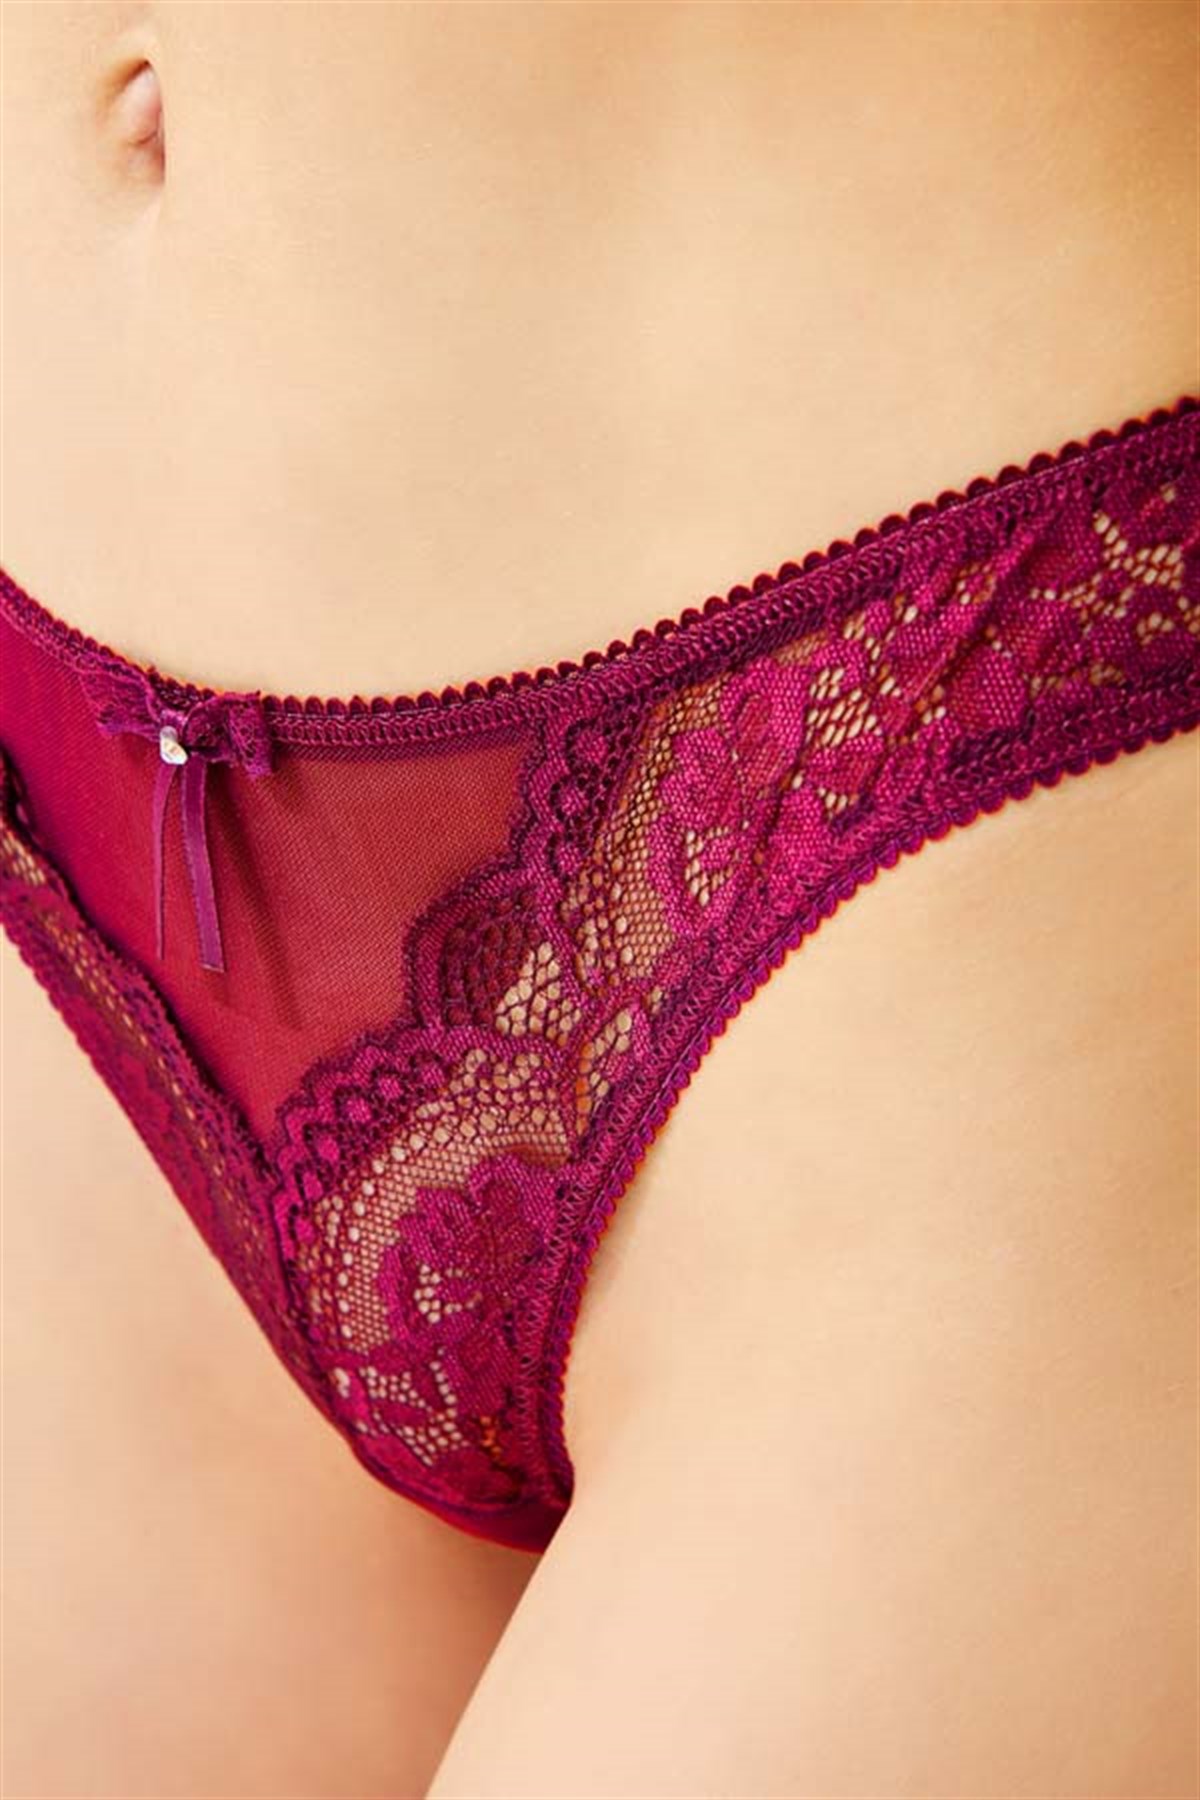 Lace Brazilian Women Panty with Bow and Rhinestone CH4232